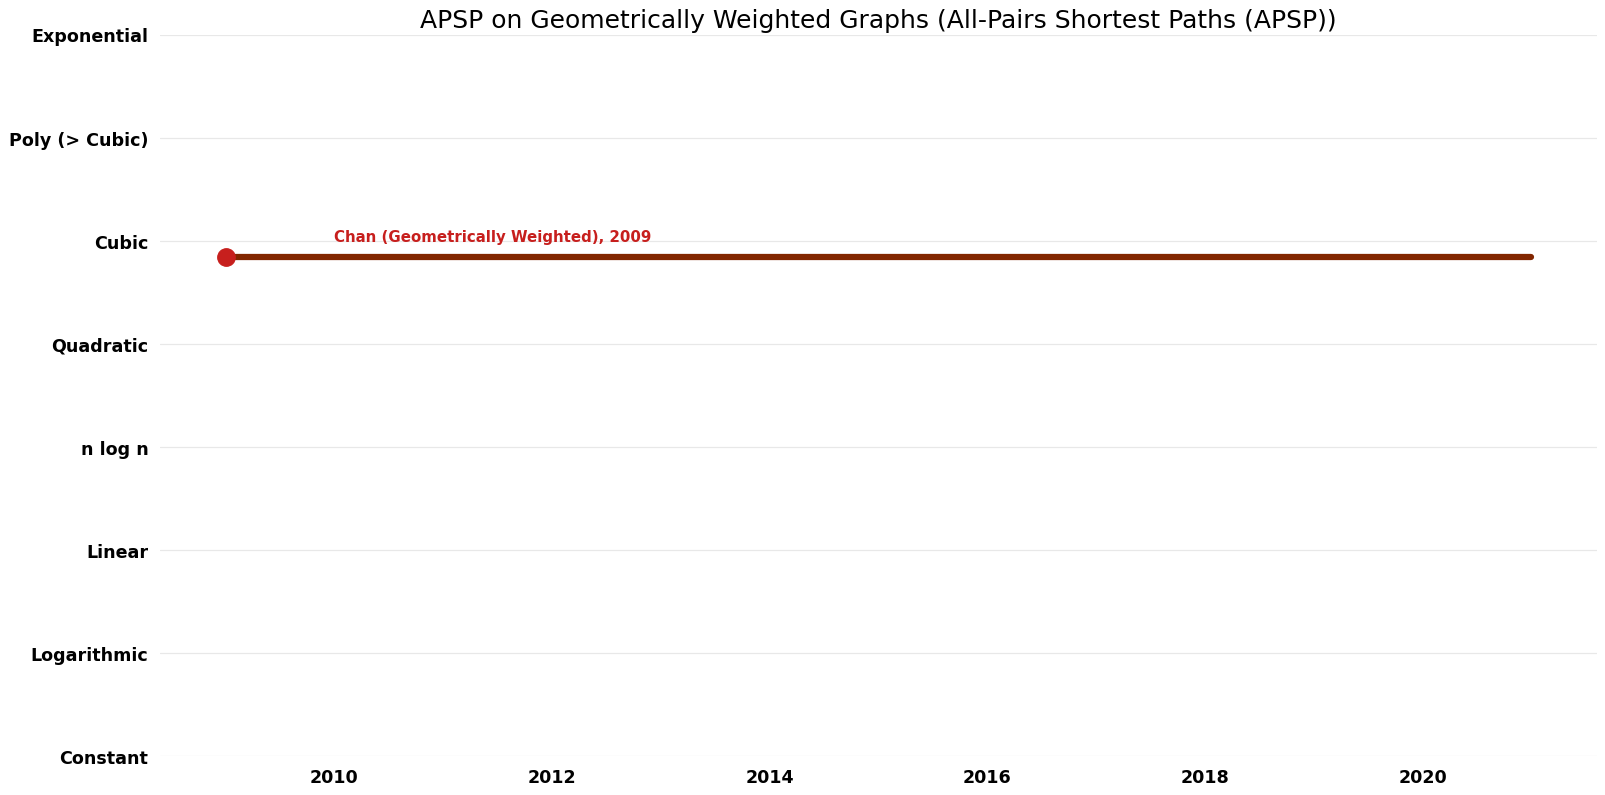 All-Pairs Shortest Paths (APSP) - APSP on Geometrically Weighted Graphs - Time.png